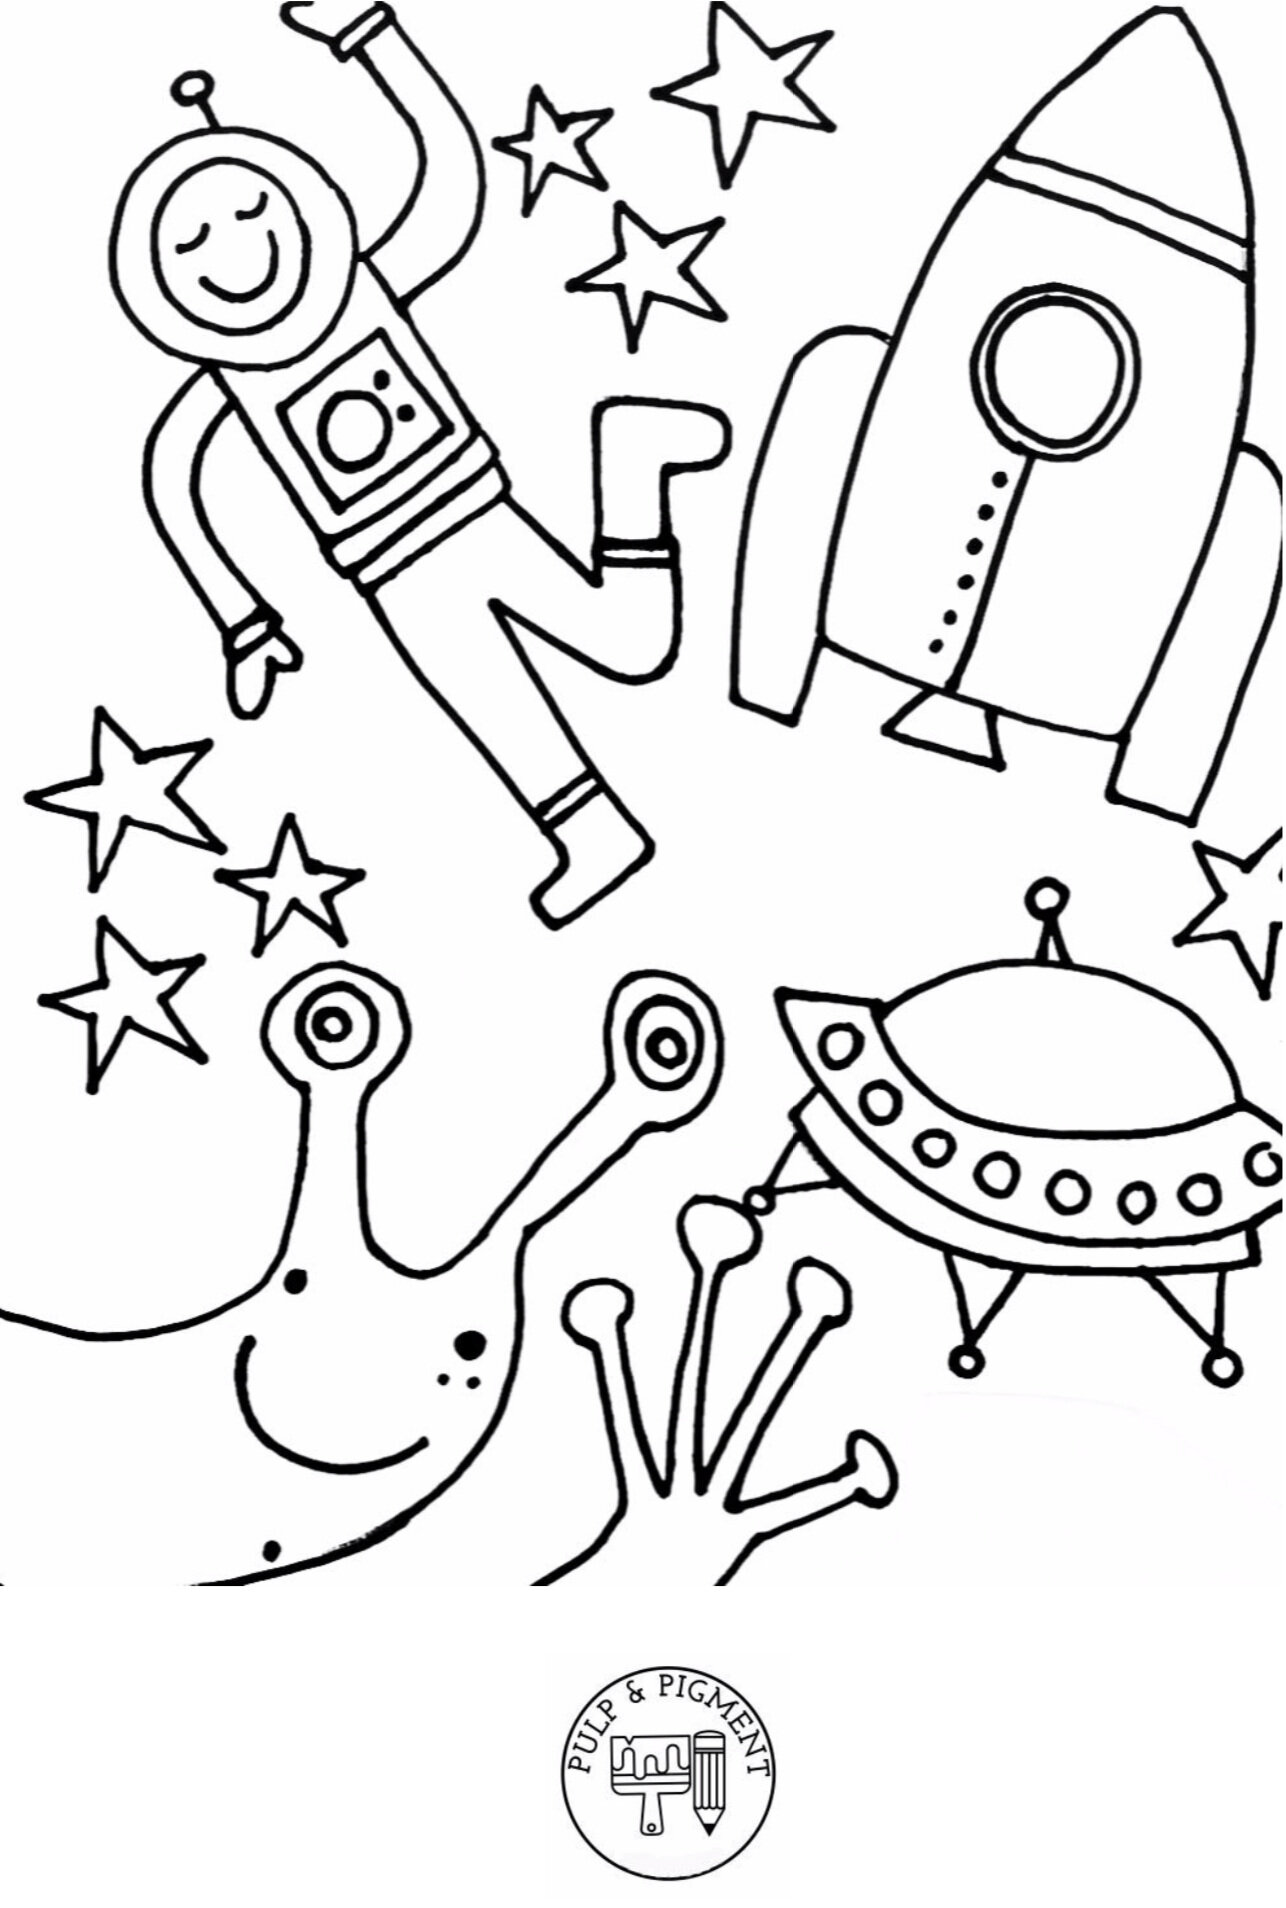 Outer Space Educational Resource Storybots Coloring Pages coloring pages  storybots coloring I trust coloring pages.